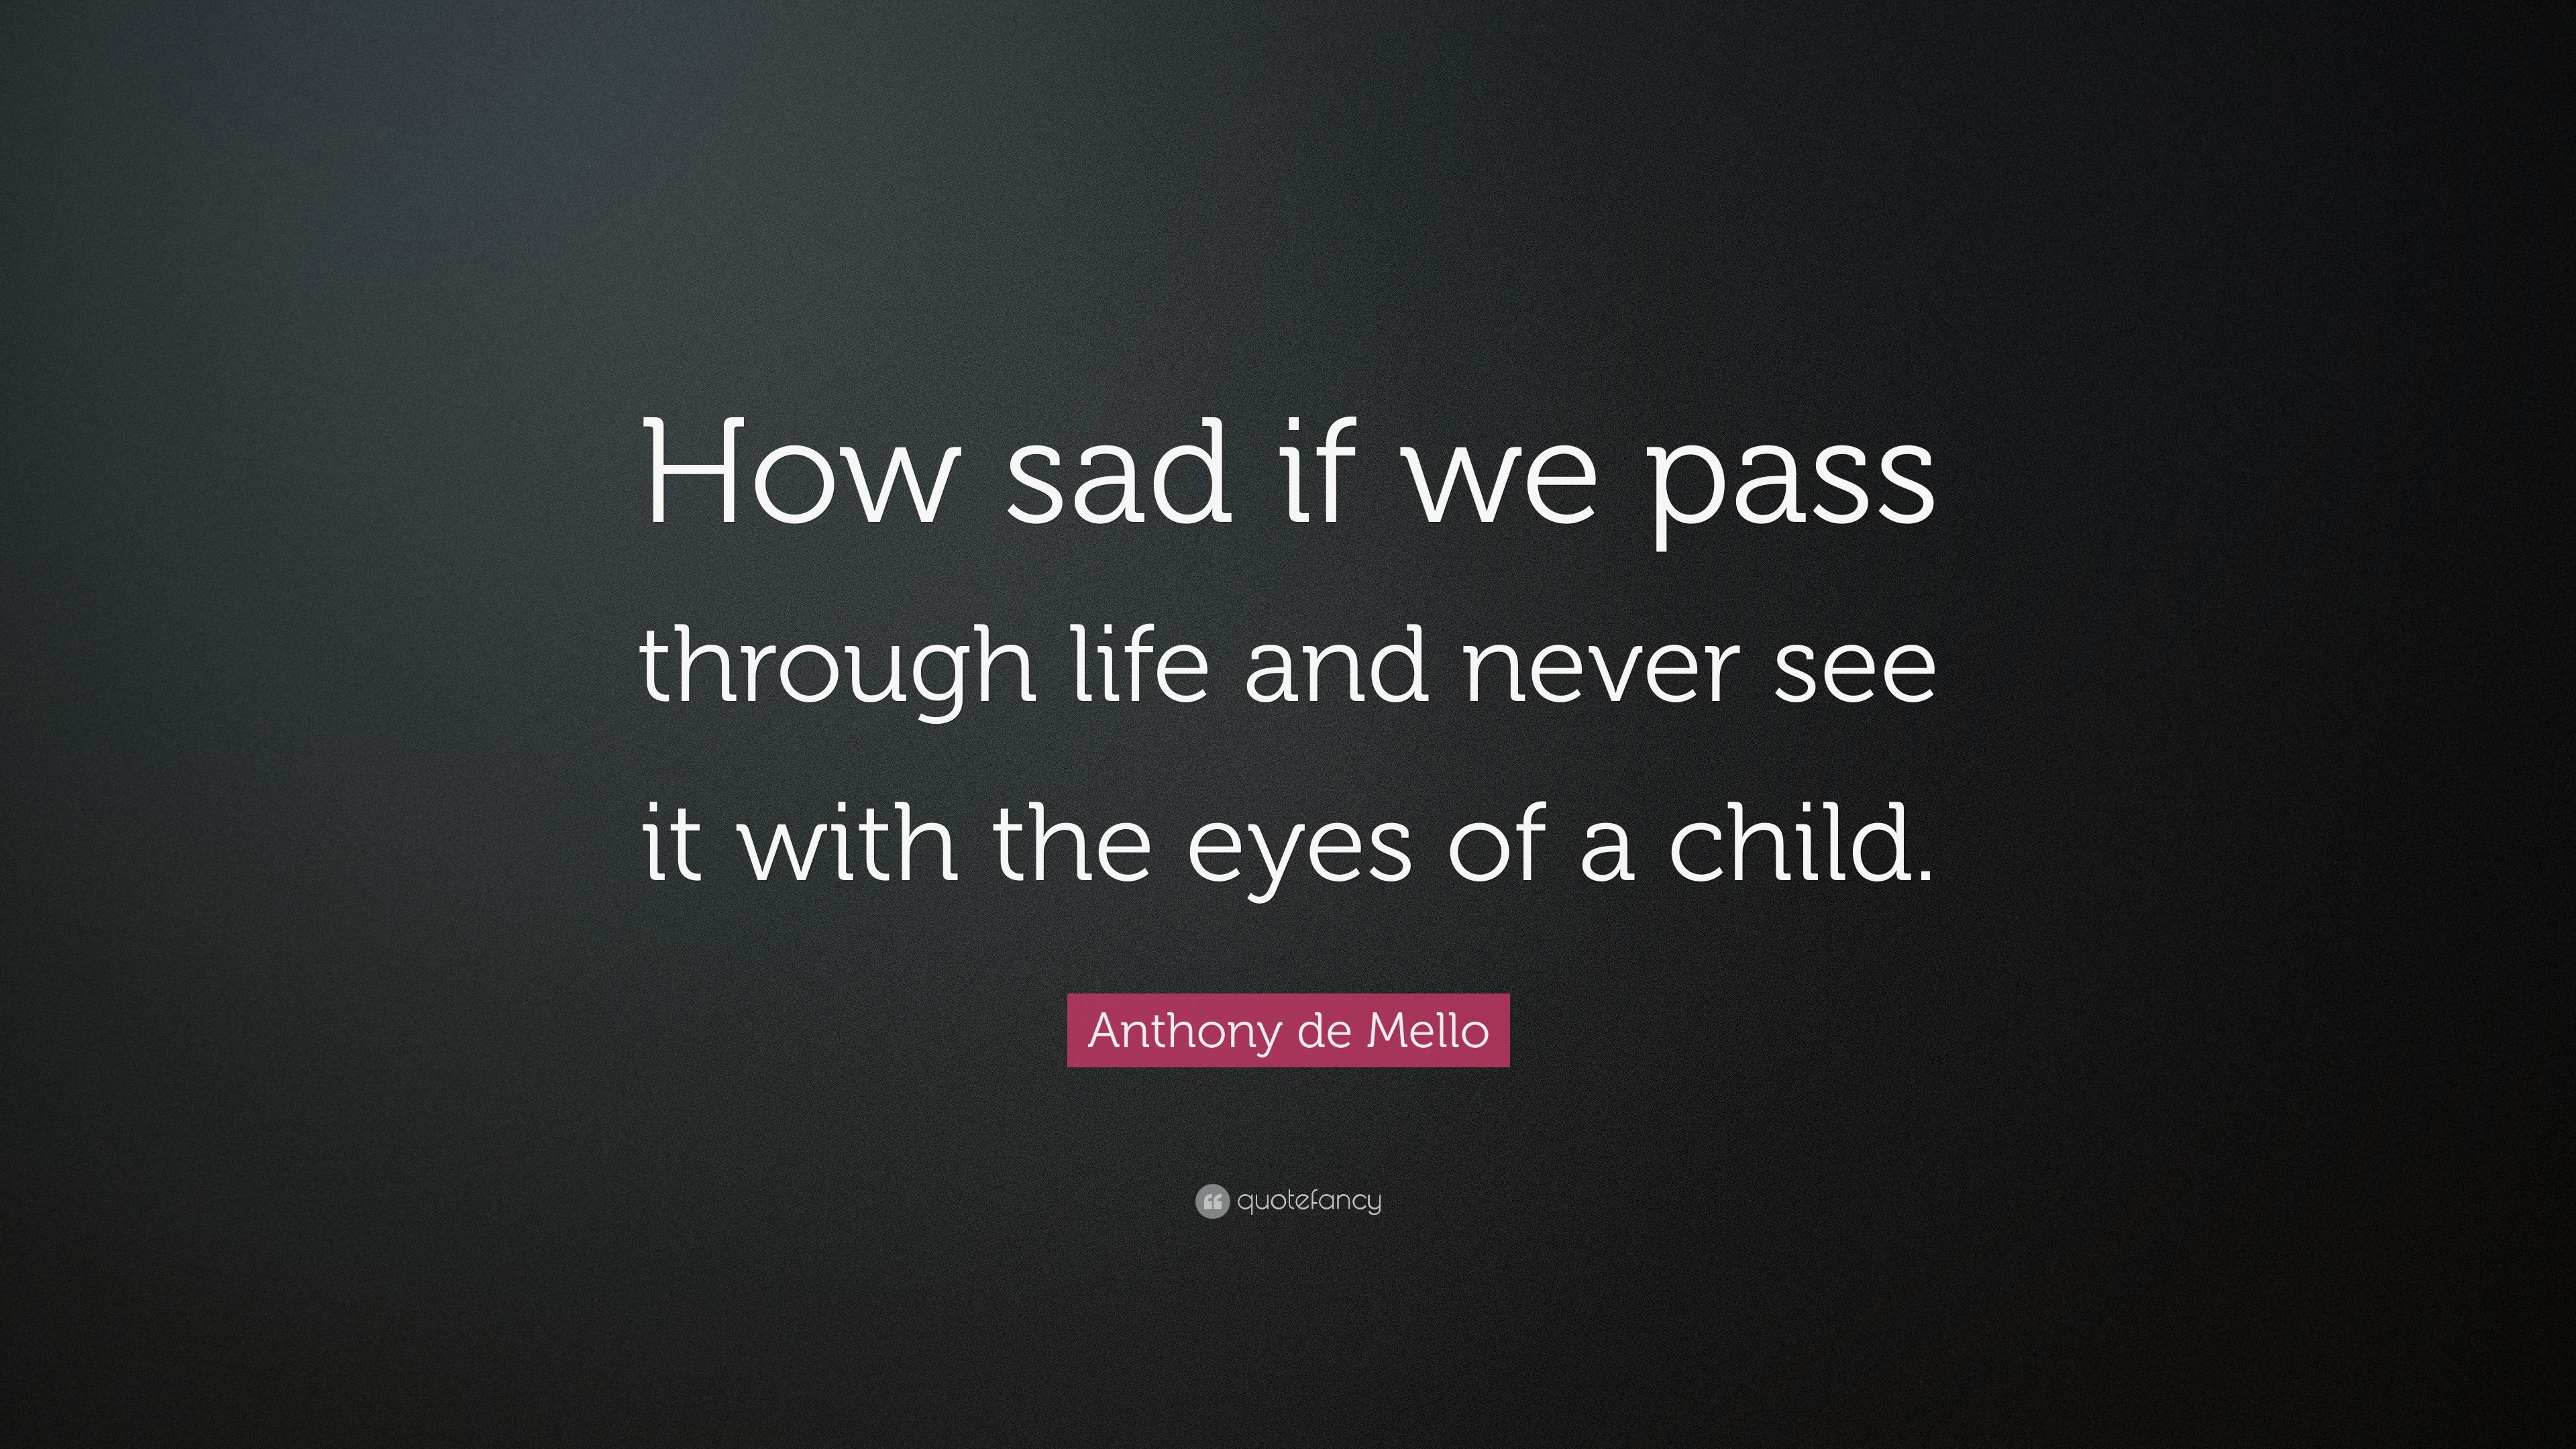 Anthony de Mello Quote: “How sad if we pass through life and never see it with the eyes of a child.” (10 wallpaper)